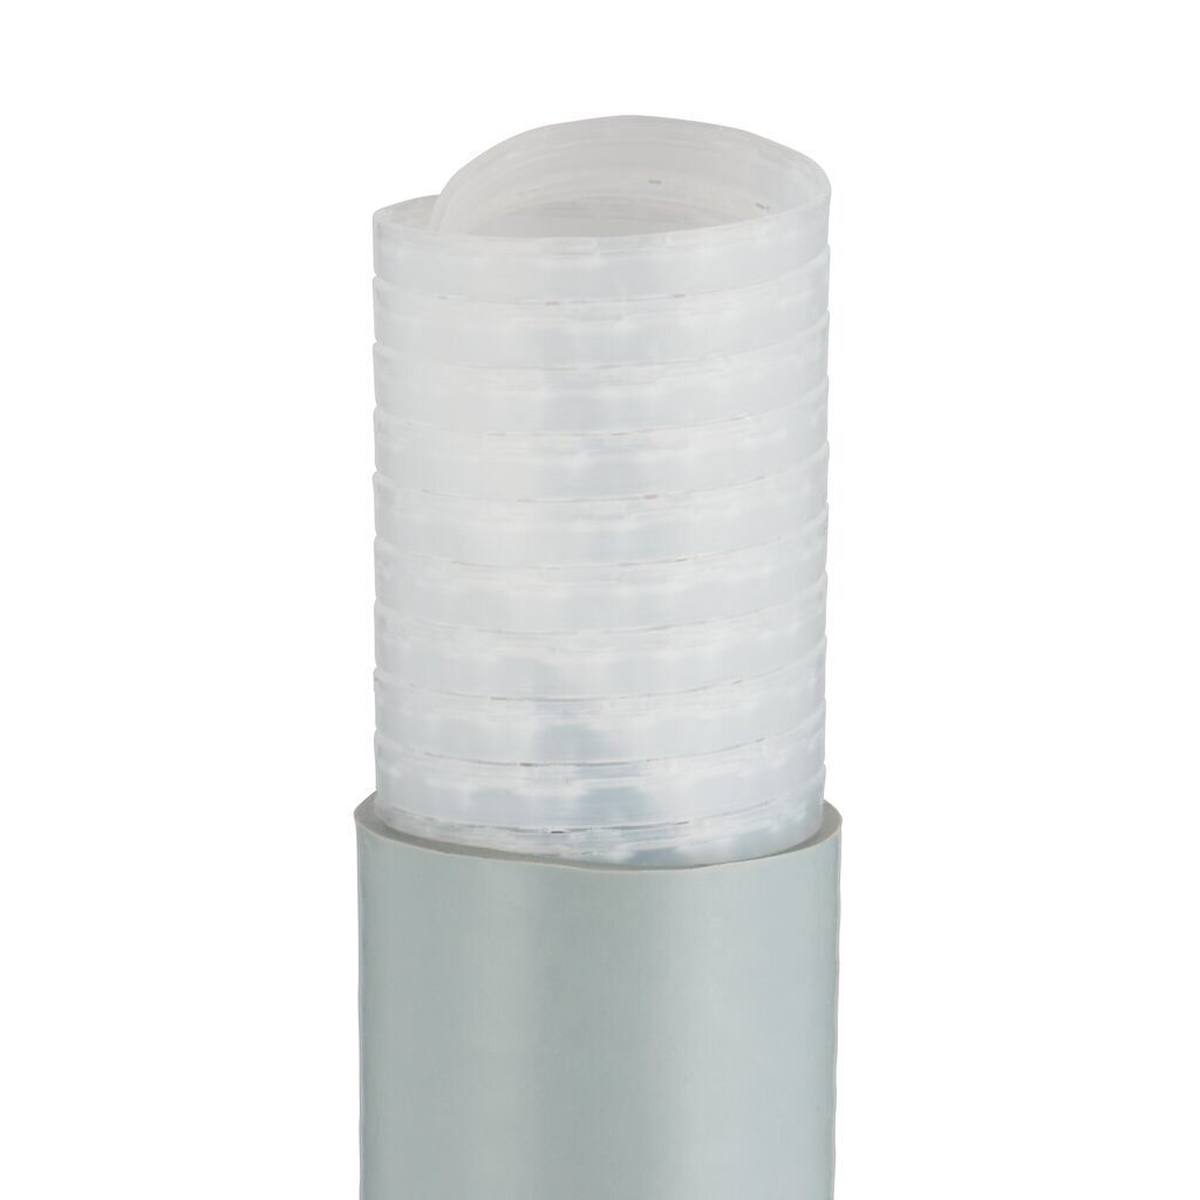 3M 8447.8 Gaine thermorétractable à froid, silicone, gris clair, 24,2/14,1 mm, 184 mm